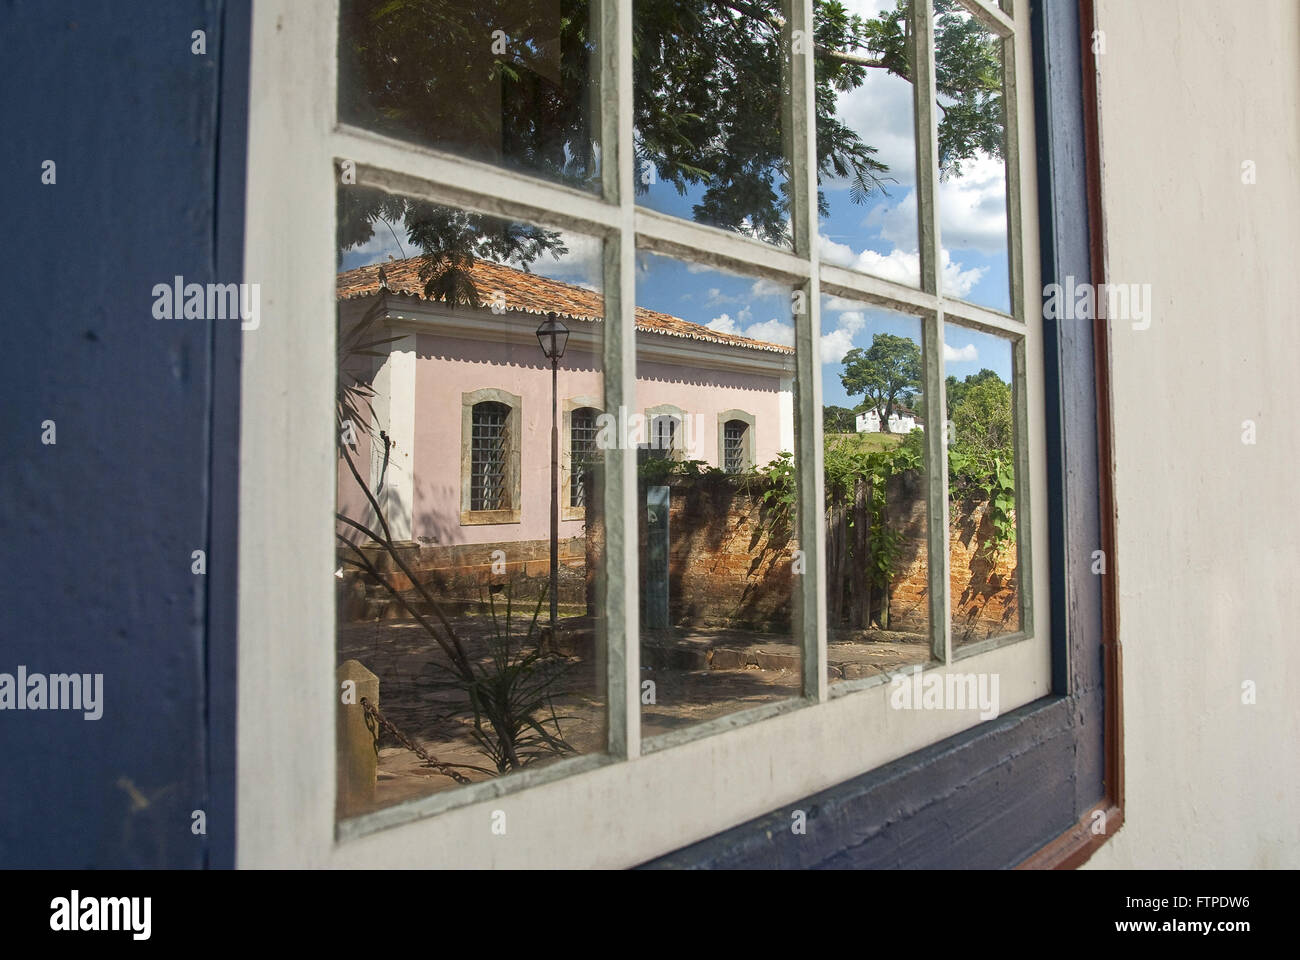 Reflection chain publishes in the eighteenth century colonial window Stock Photo